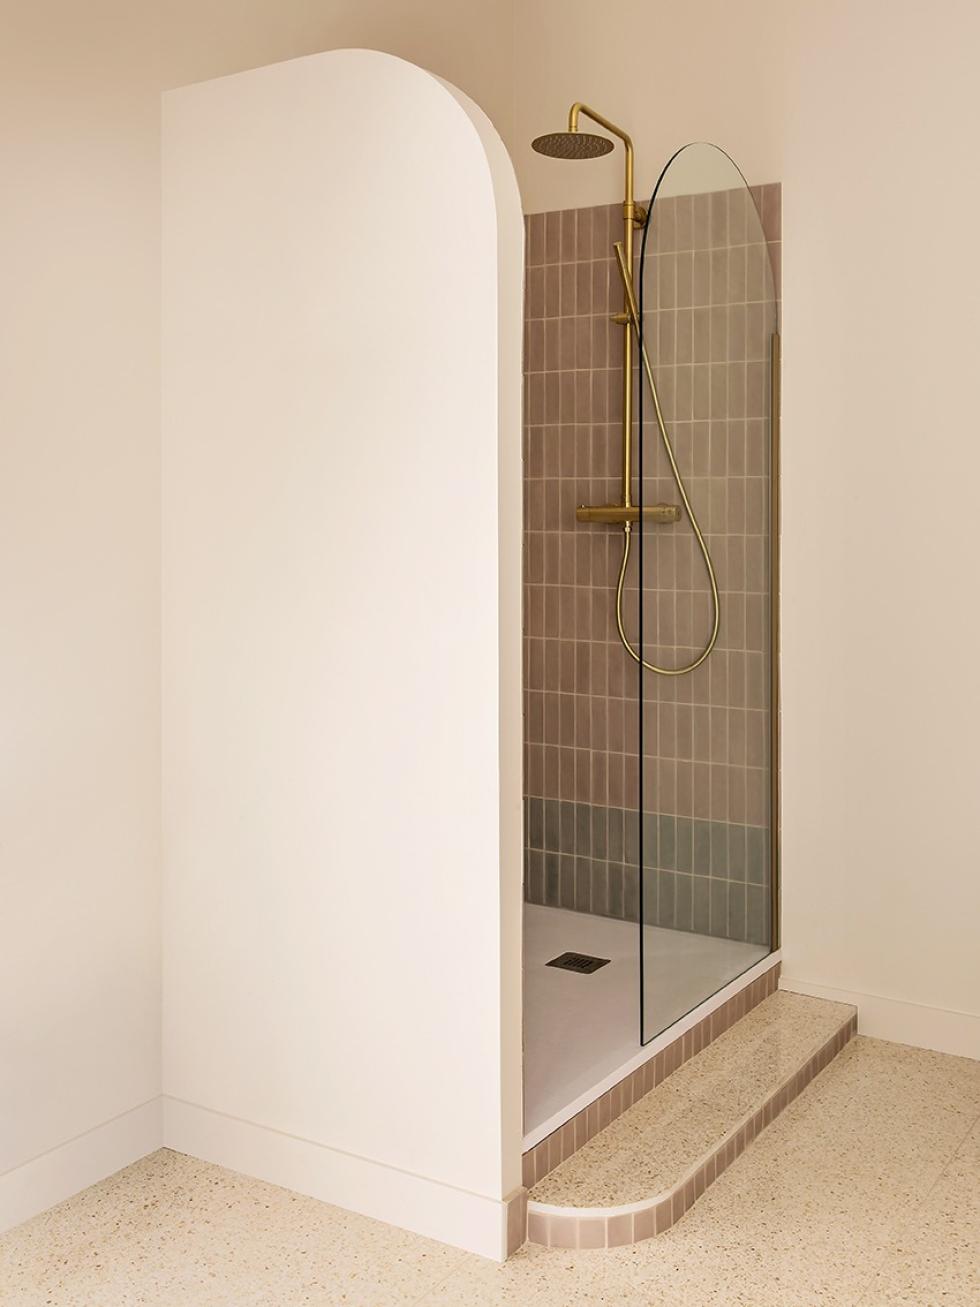 Shower covered with tiles in an arch shape